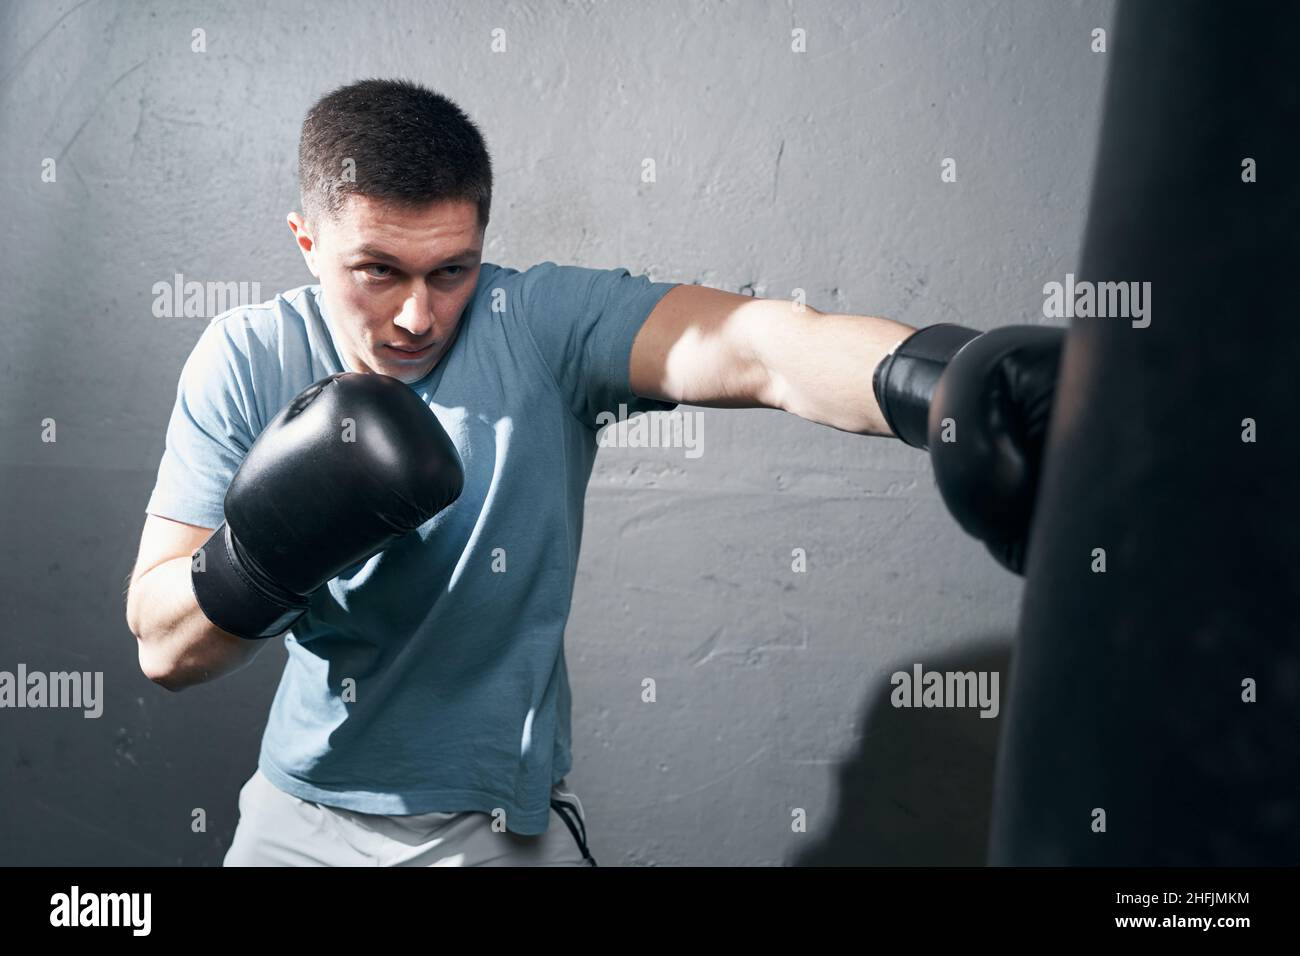 Focused young Caucasian male boxer training indoors Stock Photo